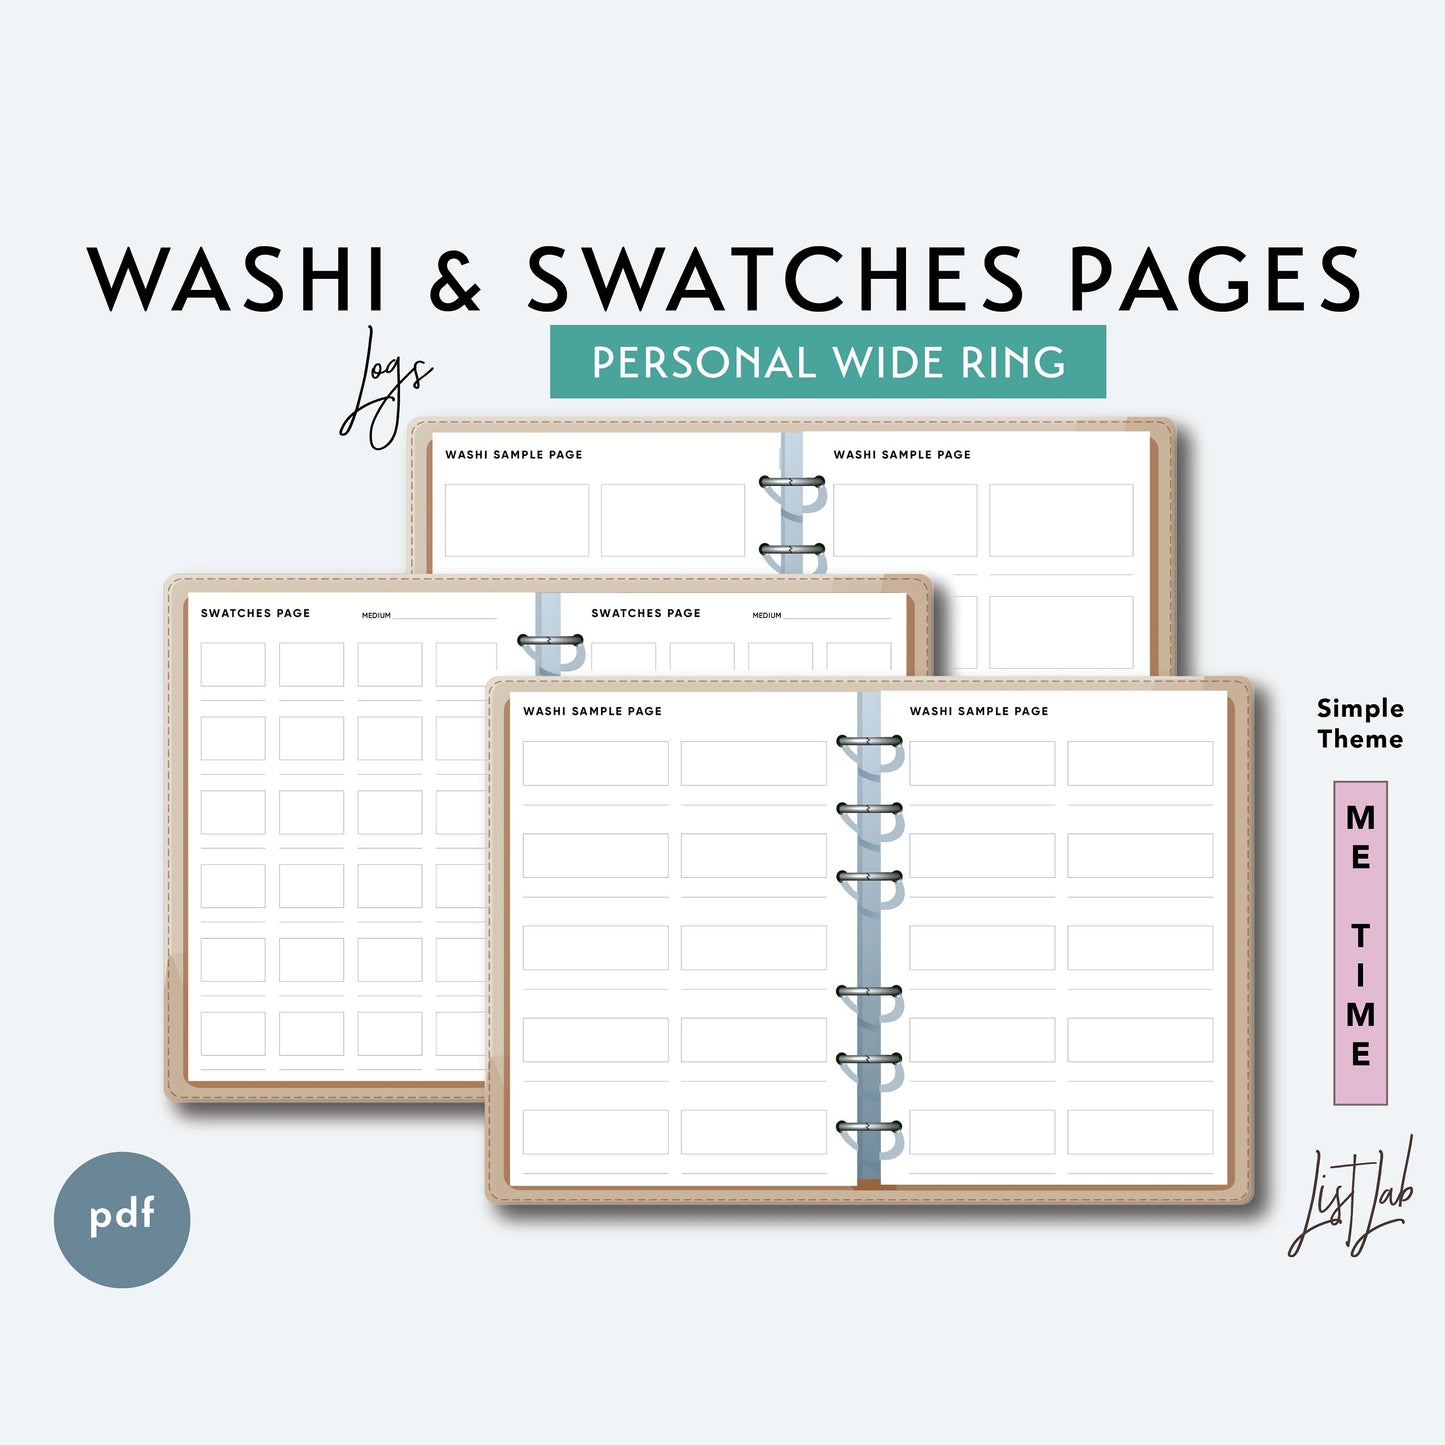 Personal Wide Ring WASHI and SWATCHES PAGES  Printable Insert Set